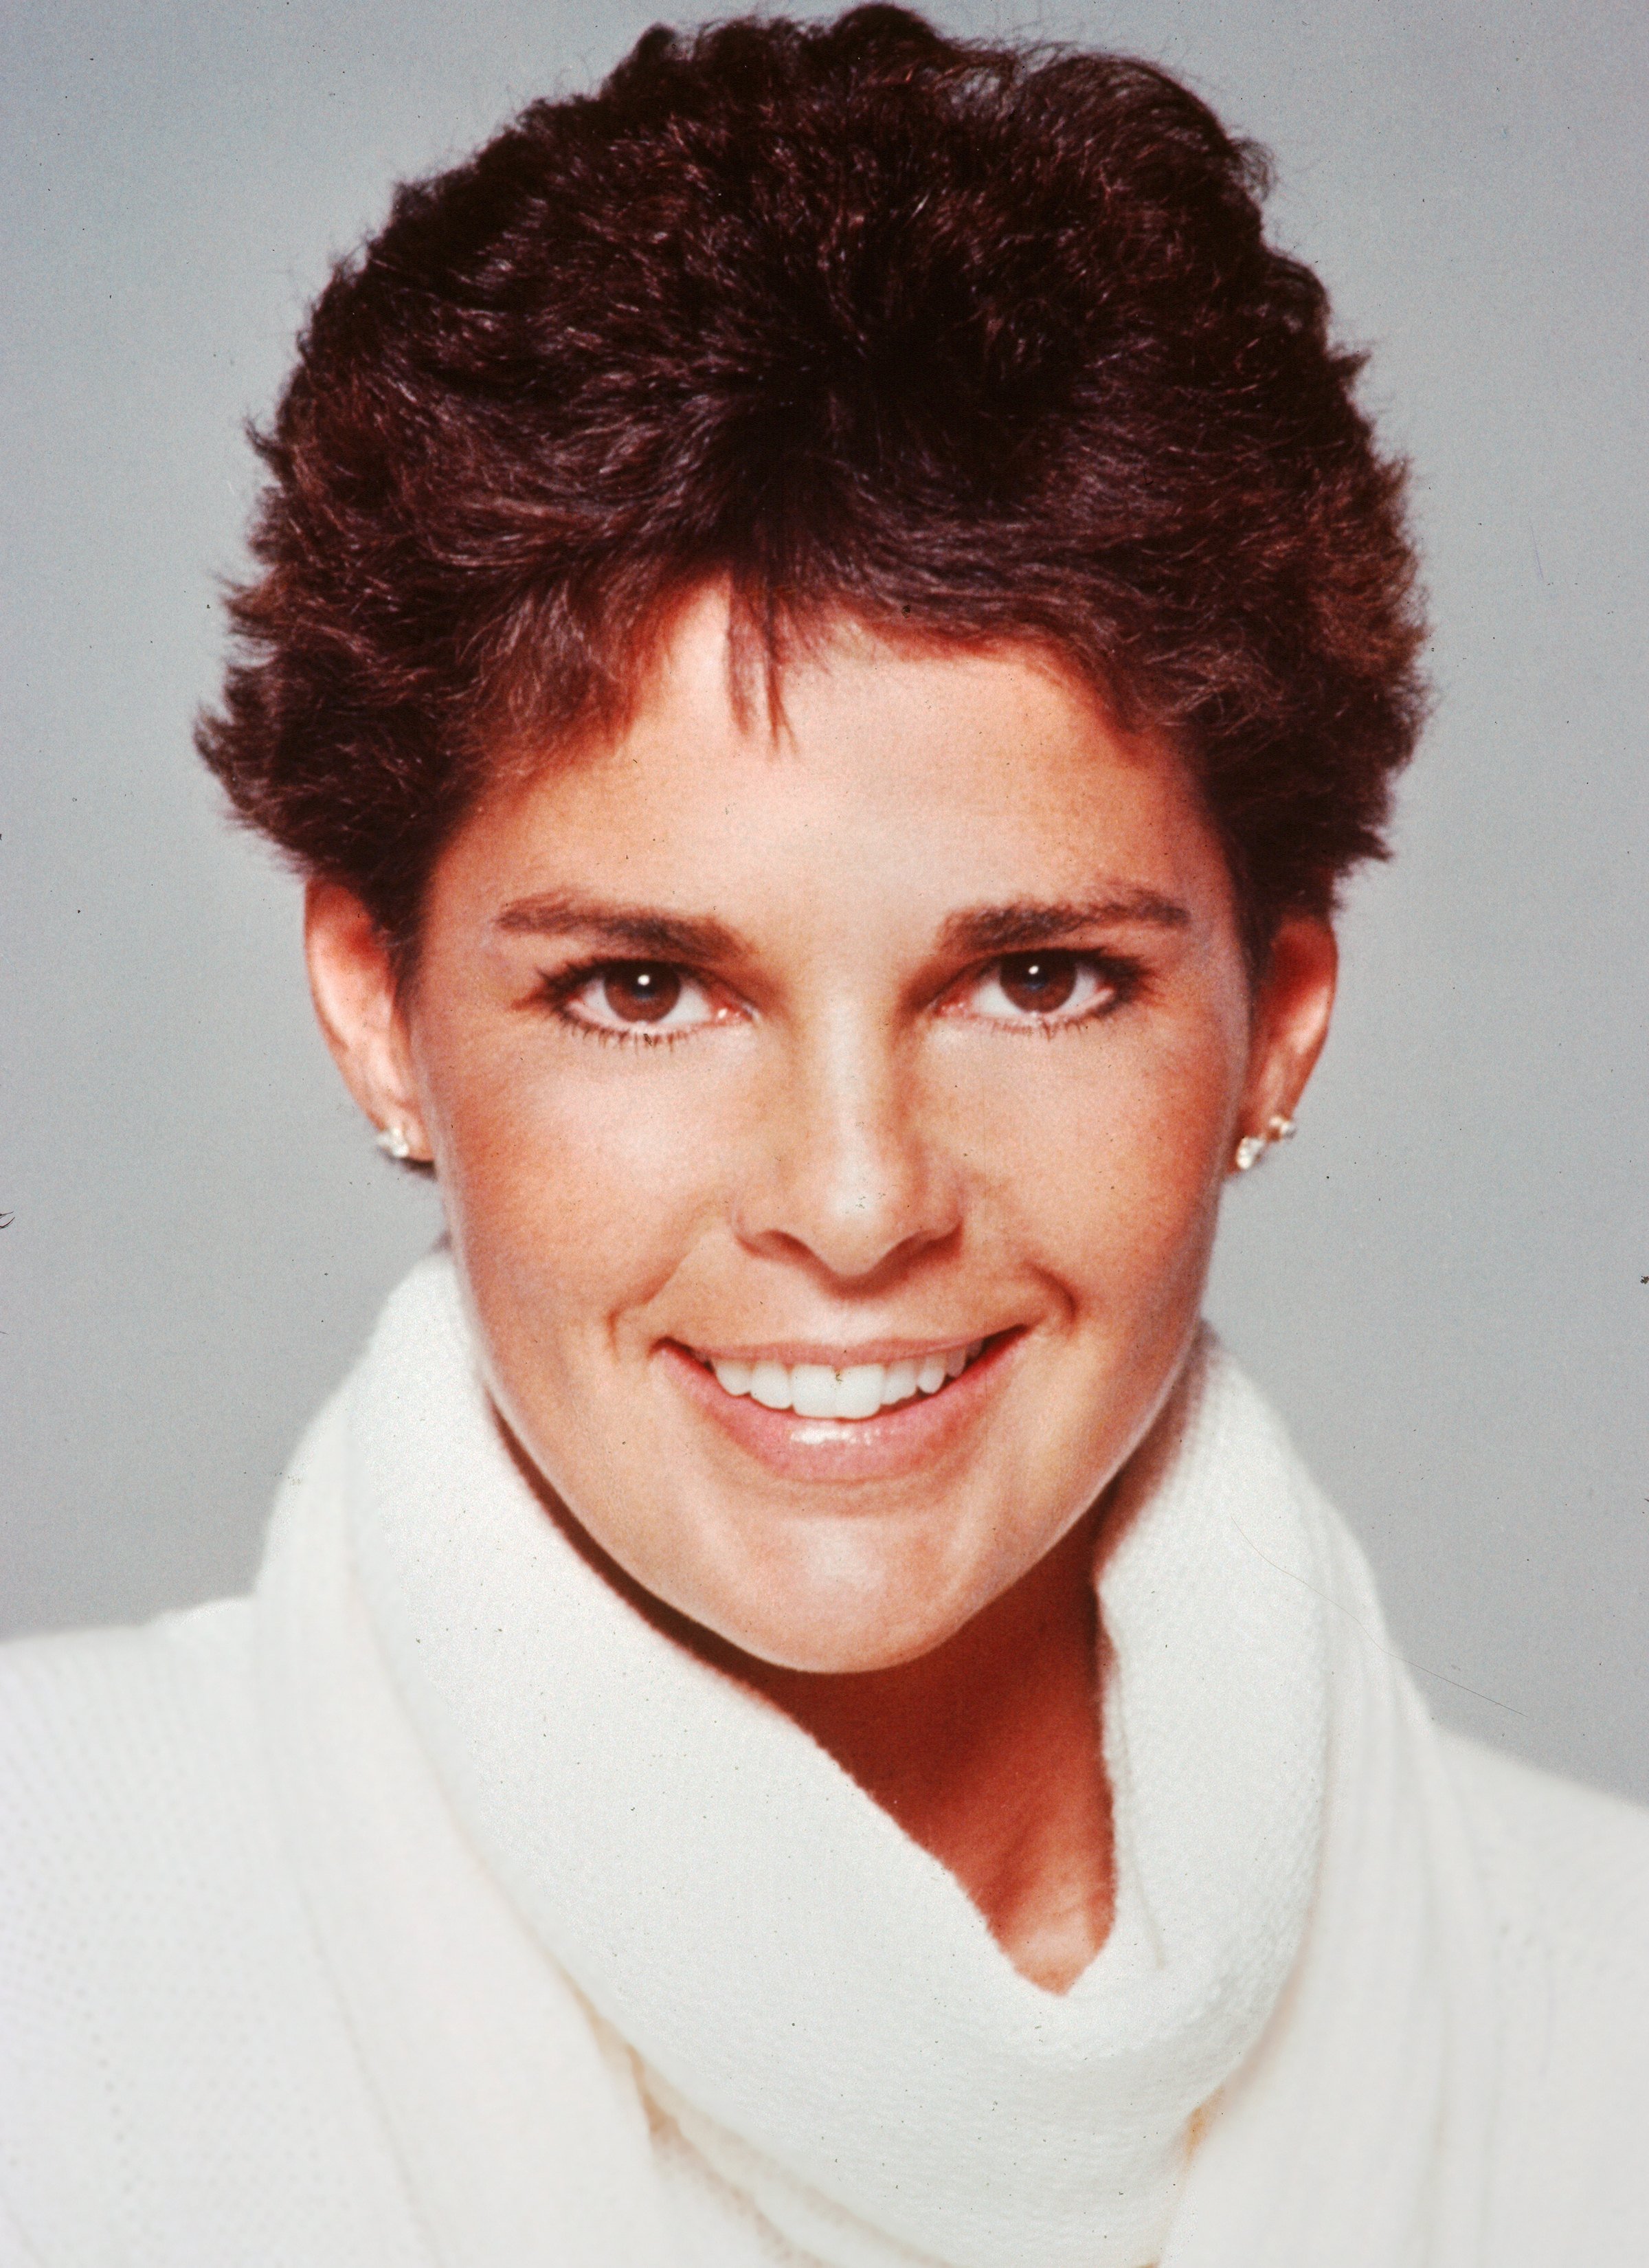 Ali MacGraw posing for a headshot in a white polo neck in 1982 in Los Angeles, California. | Source: Getty Images